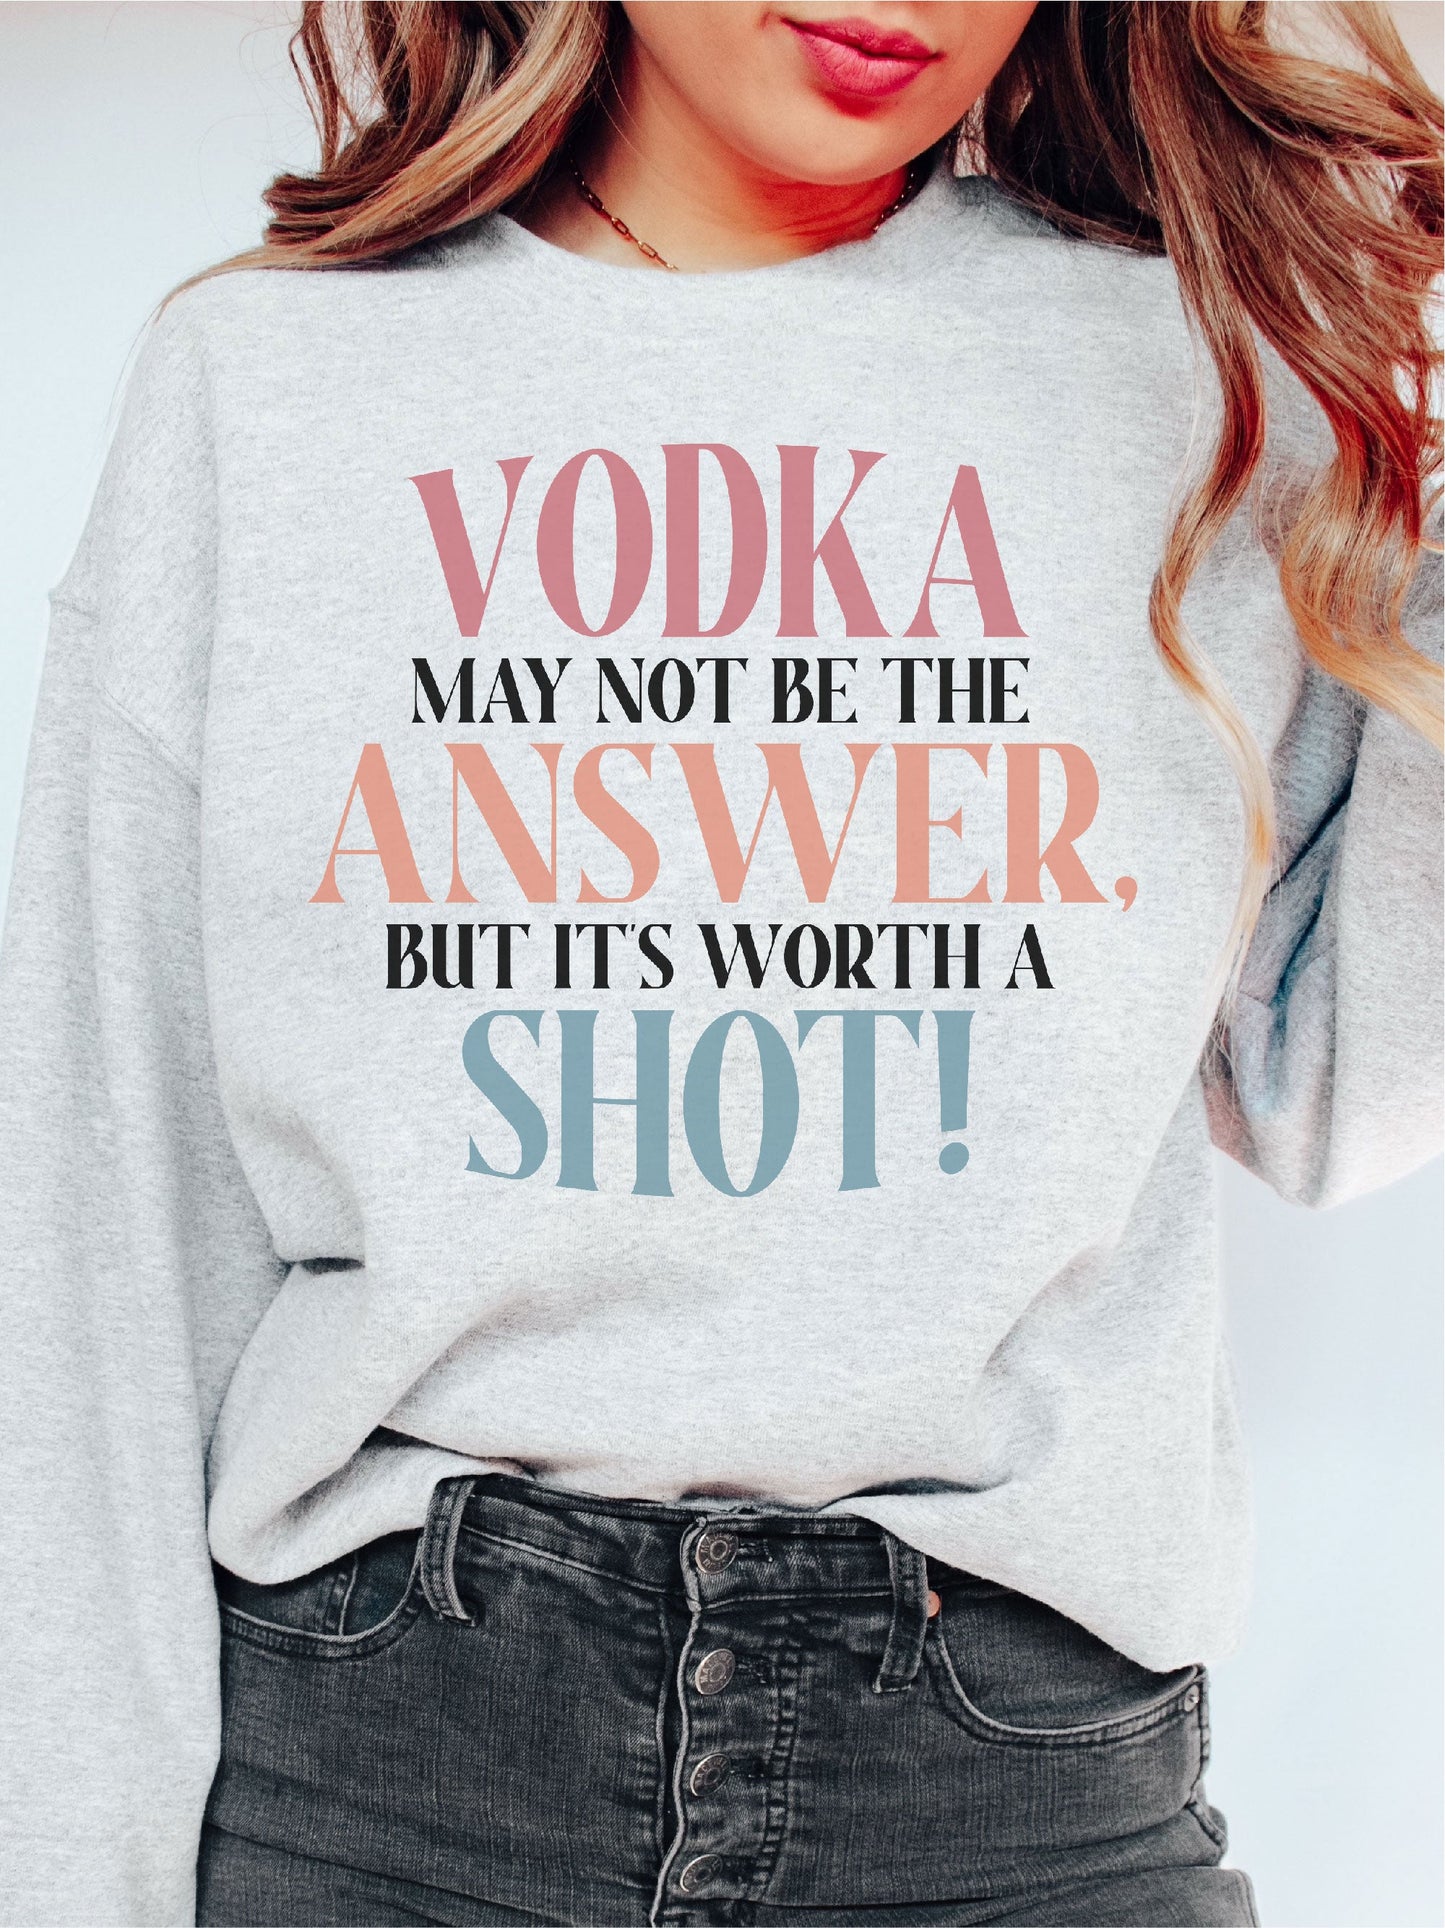 Vodka May Not Be The Answer, But It's Worth A Shot!